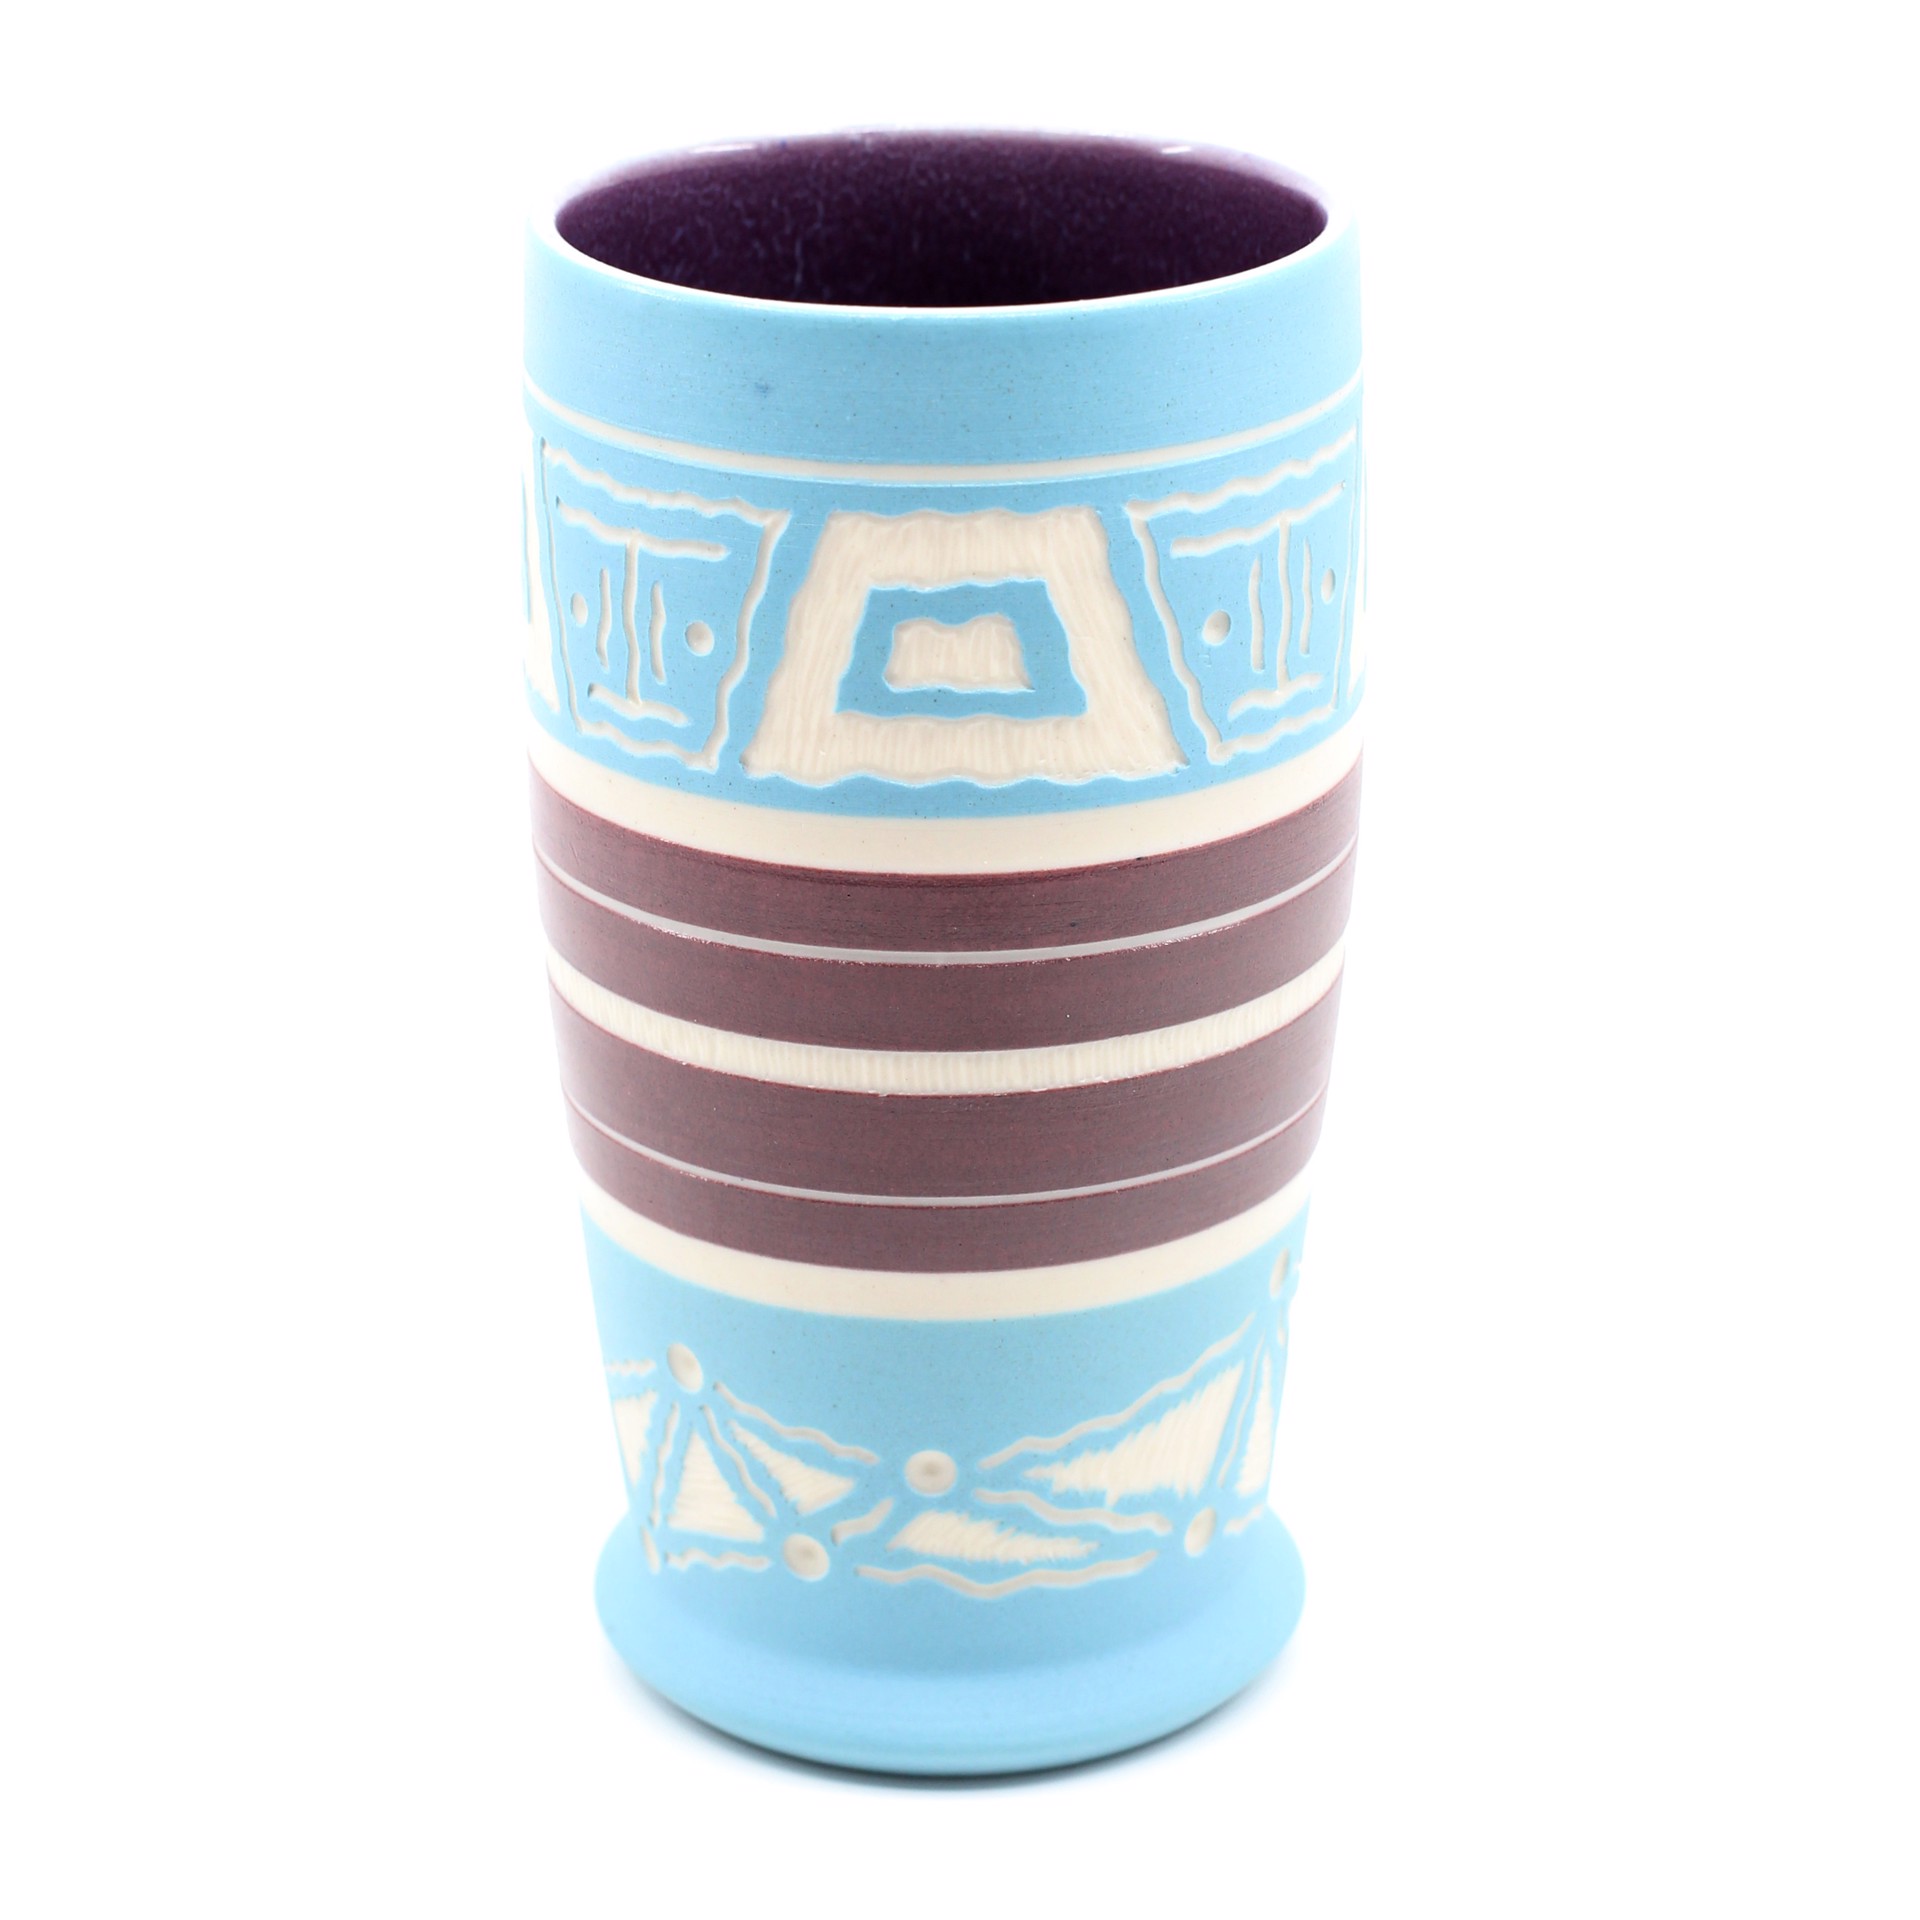 Turquoise & Purple Cup by Chris Casey